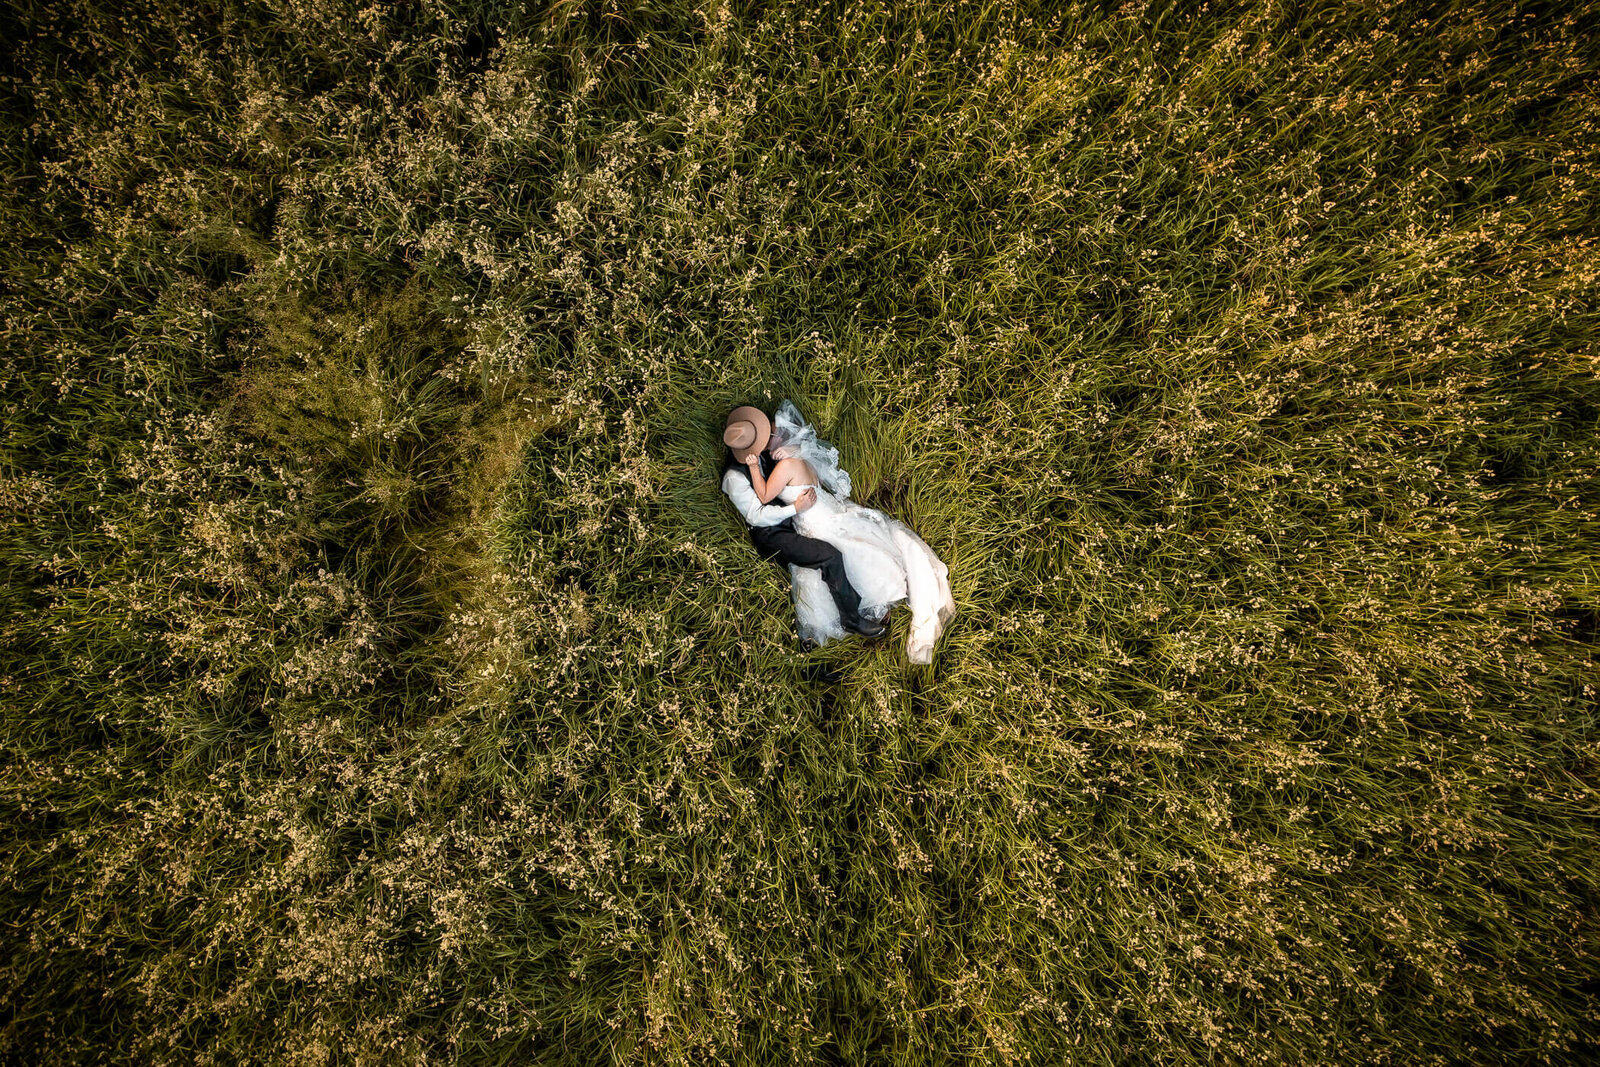 Pennsylvania wedding photo of a bride and groom holding each other in a field of grass, captured by a drone at their barn wedding venue in Pennsylvania